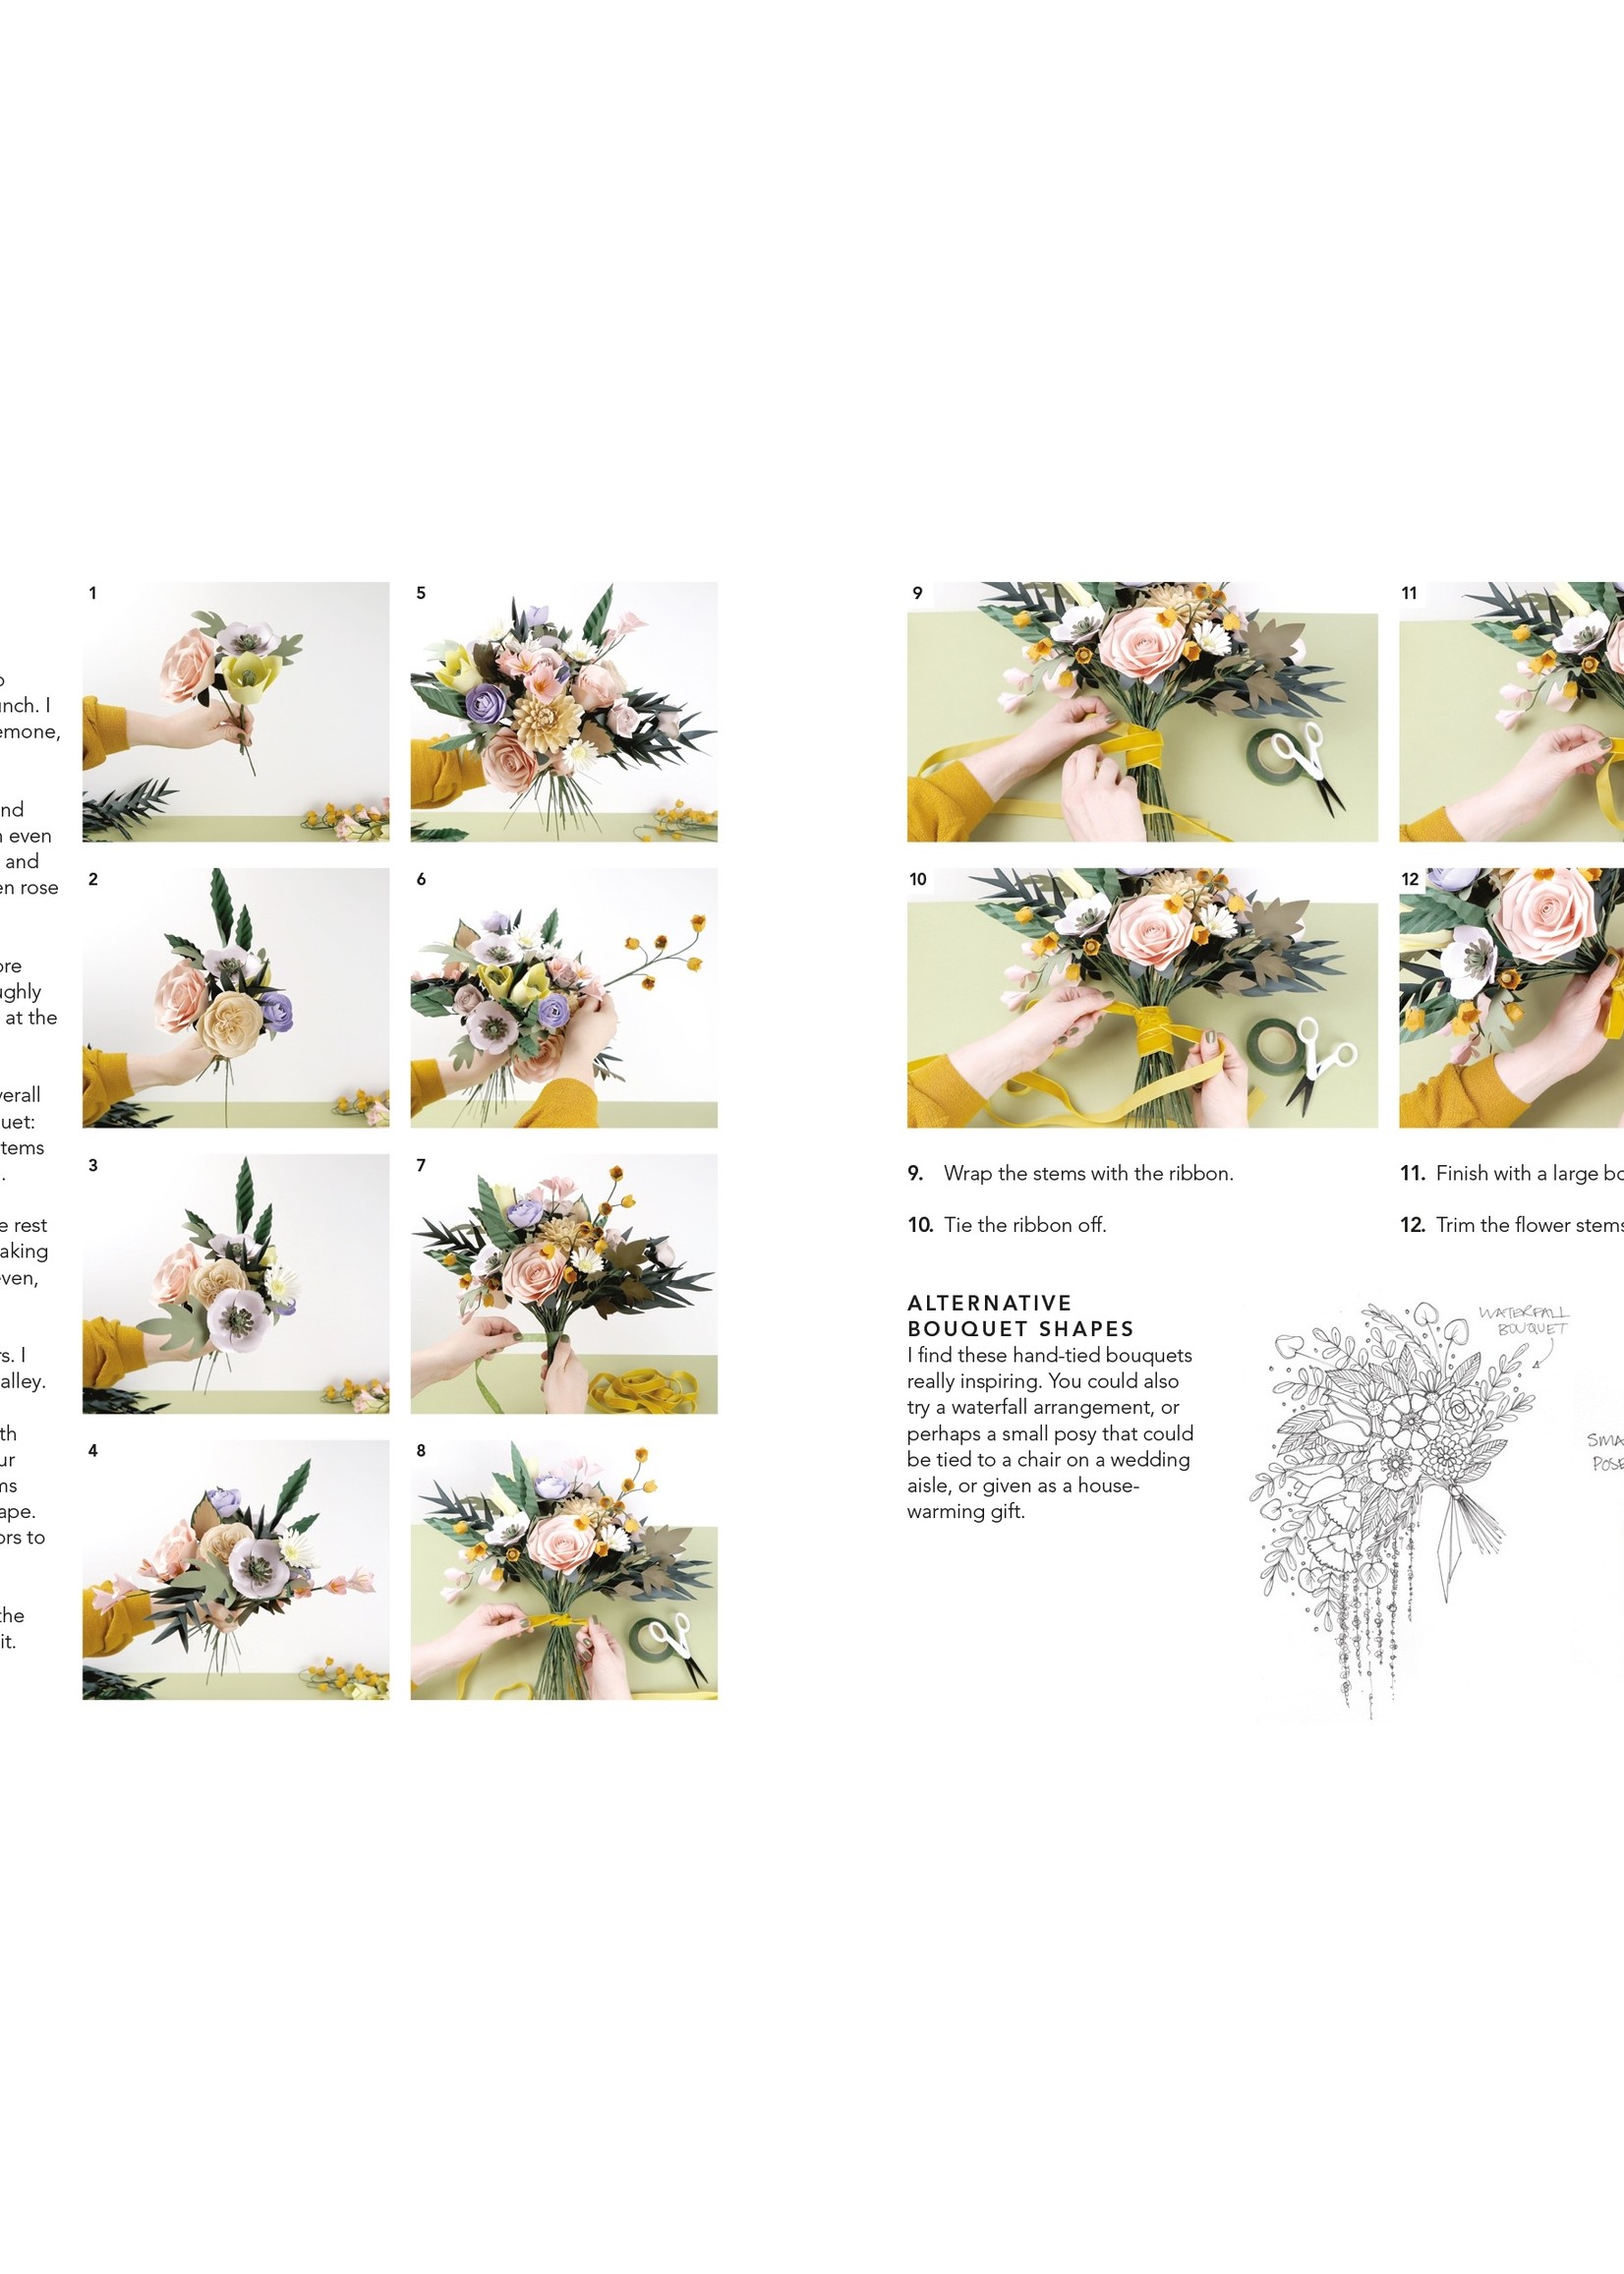 Schiffer Publishing Blooming Paper Book